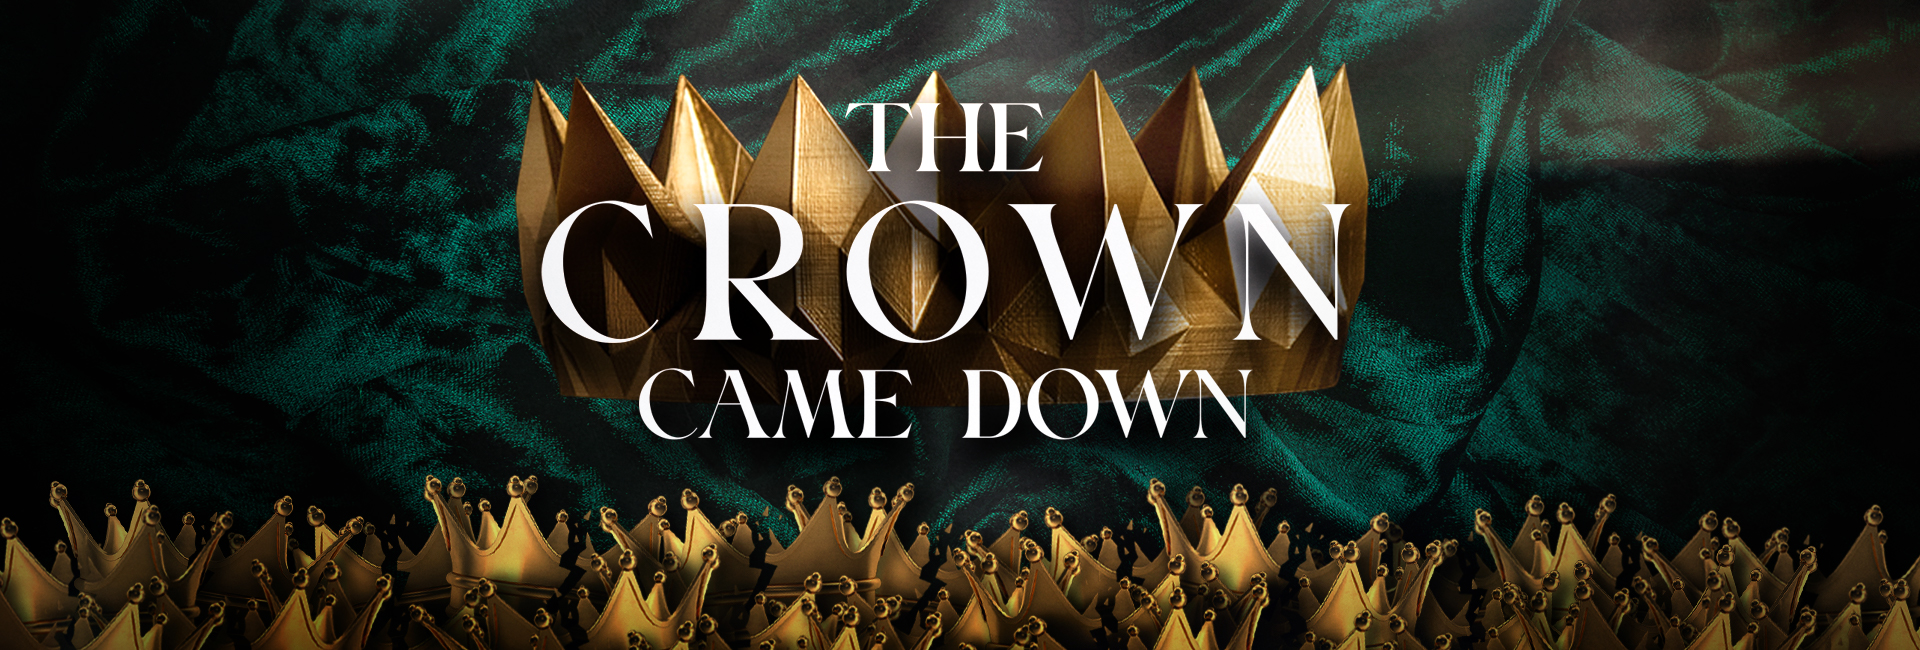 Web_TheCrown